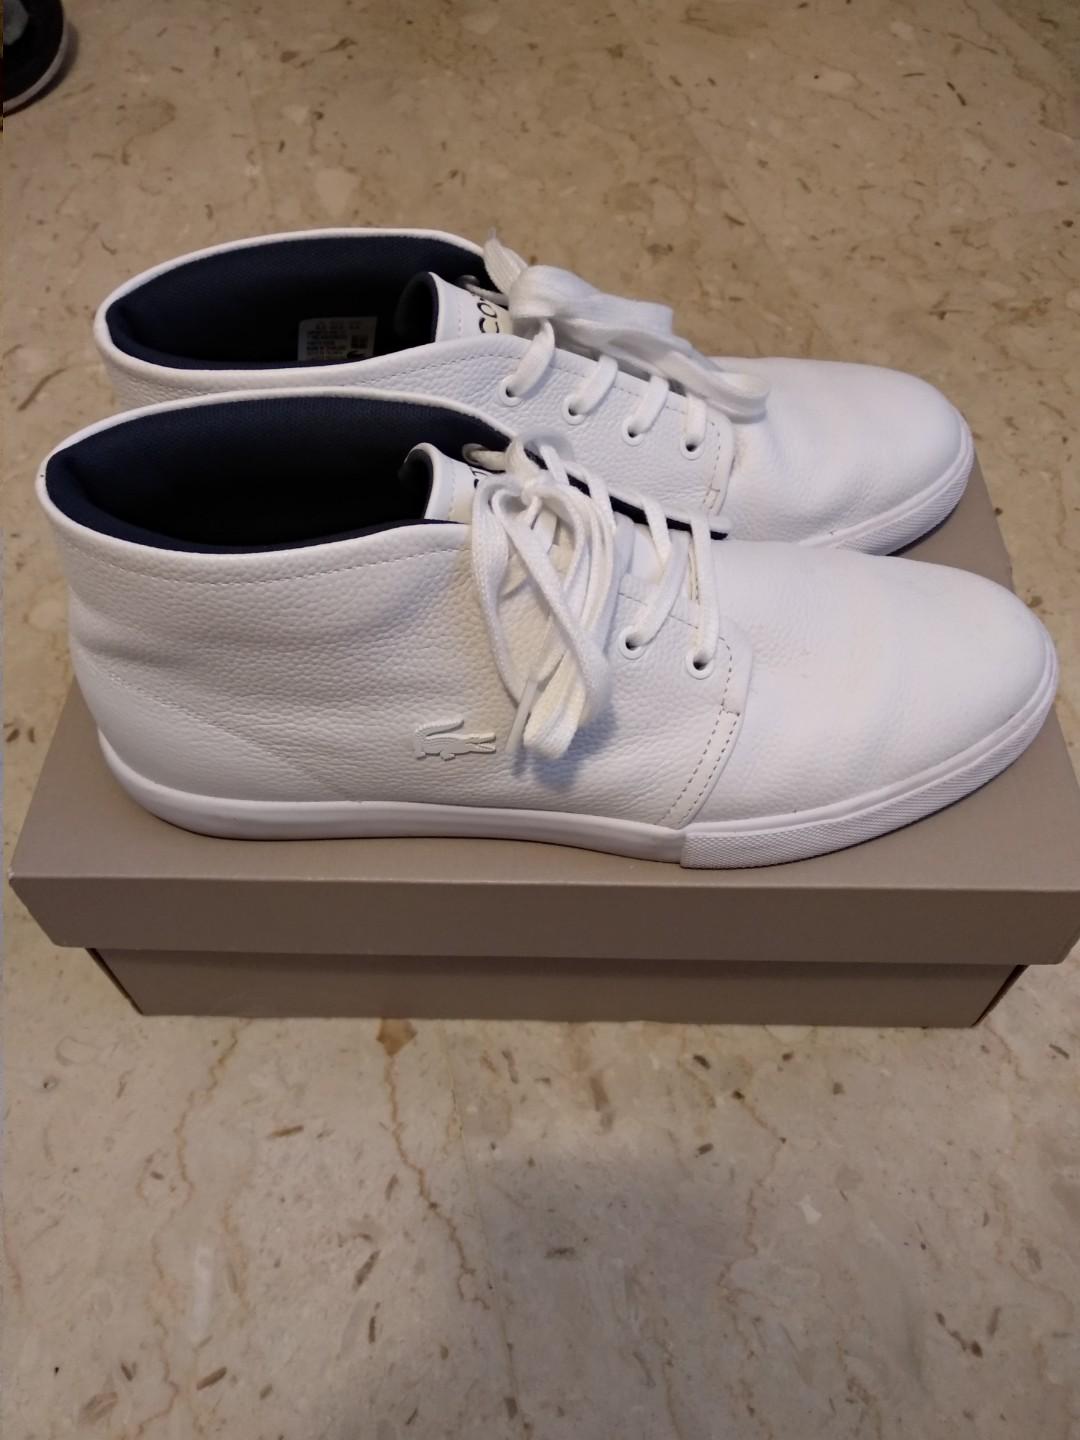 lacoste ortholite shoes price